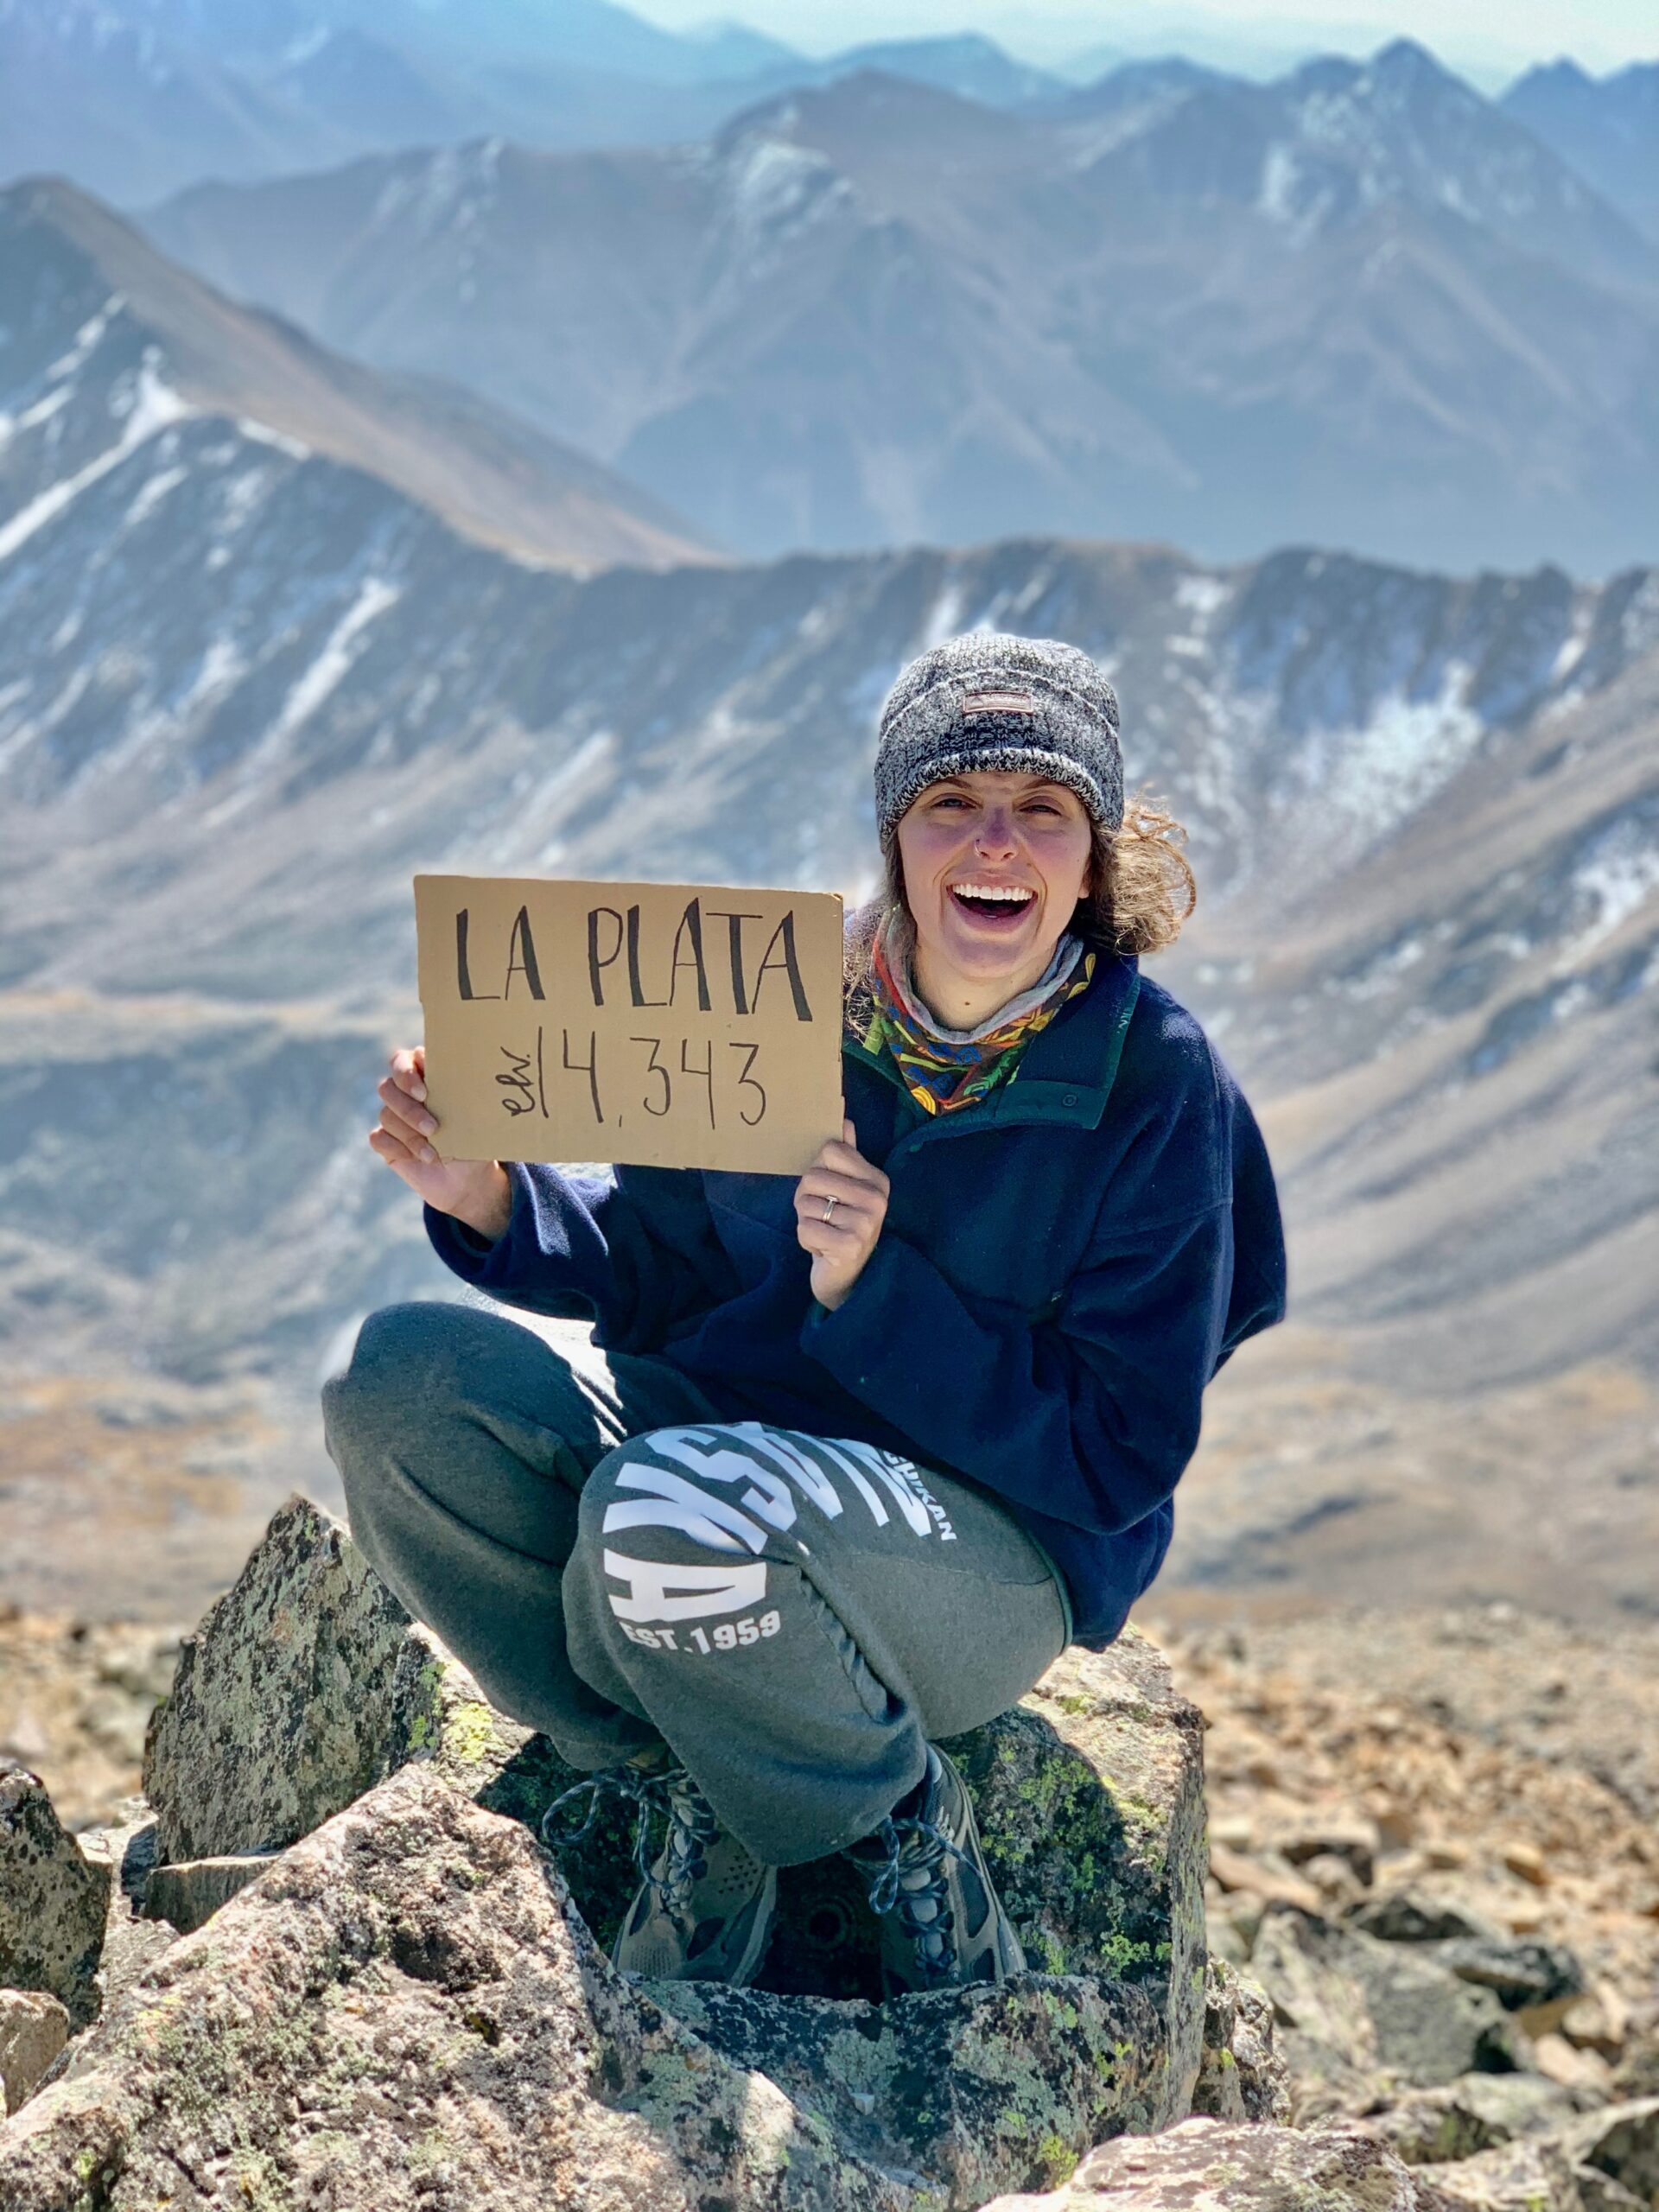 crysahna at the top of la plata peak holding a sign